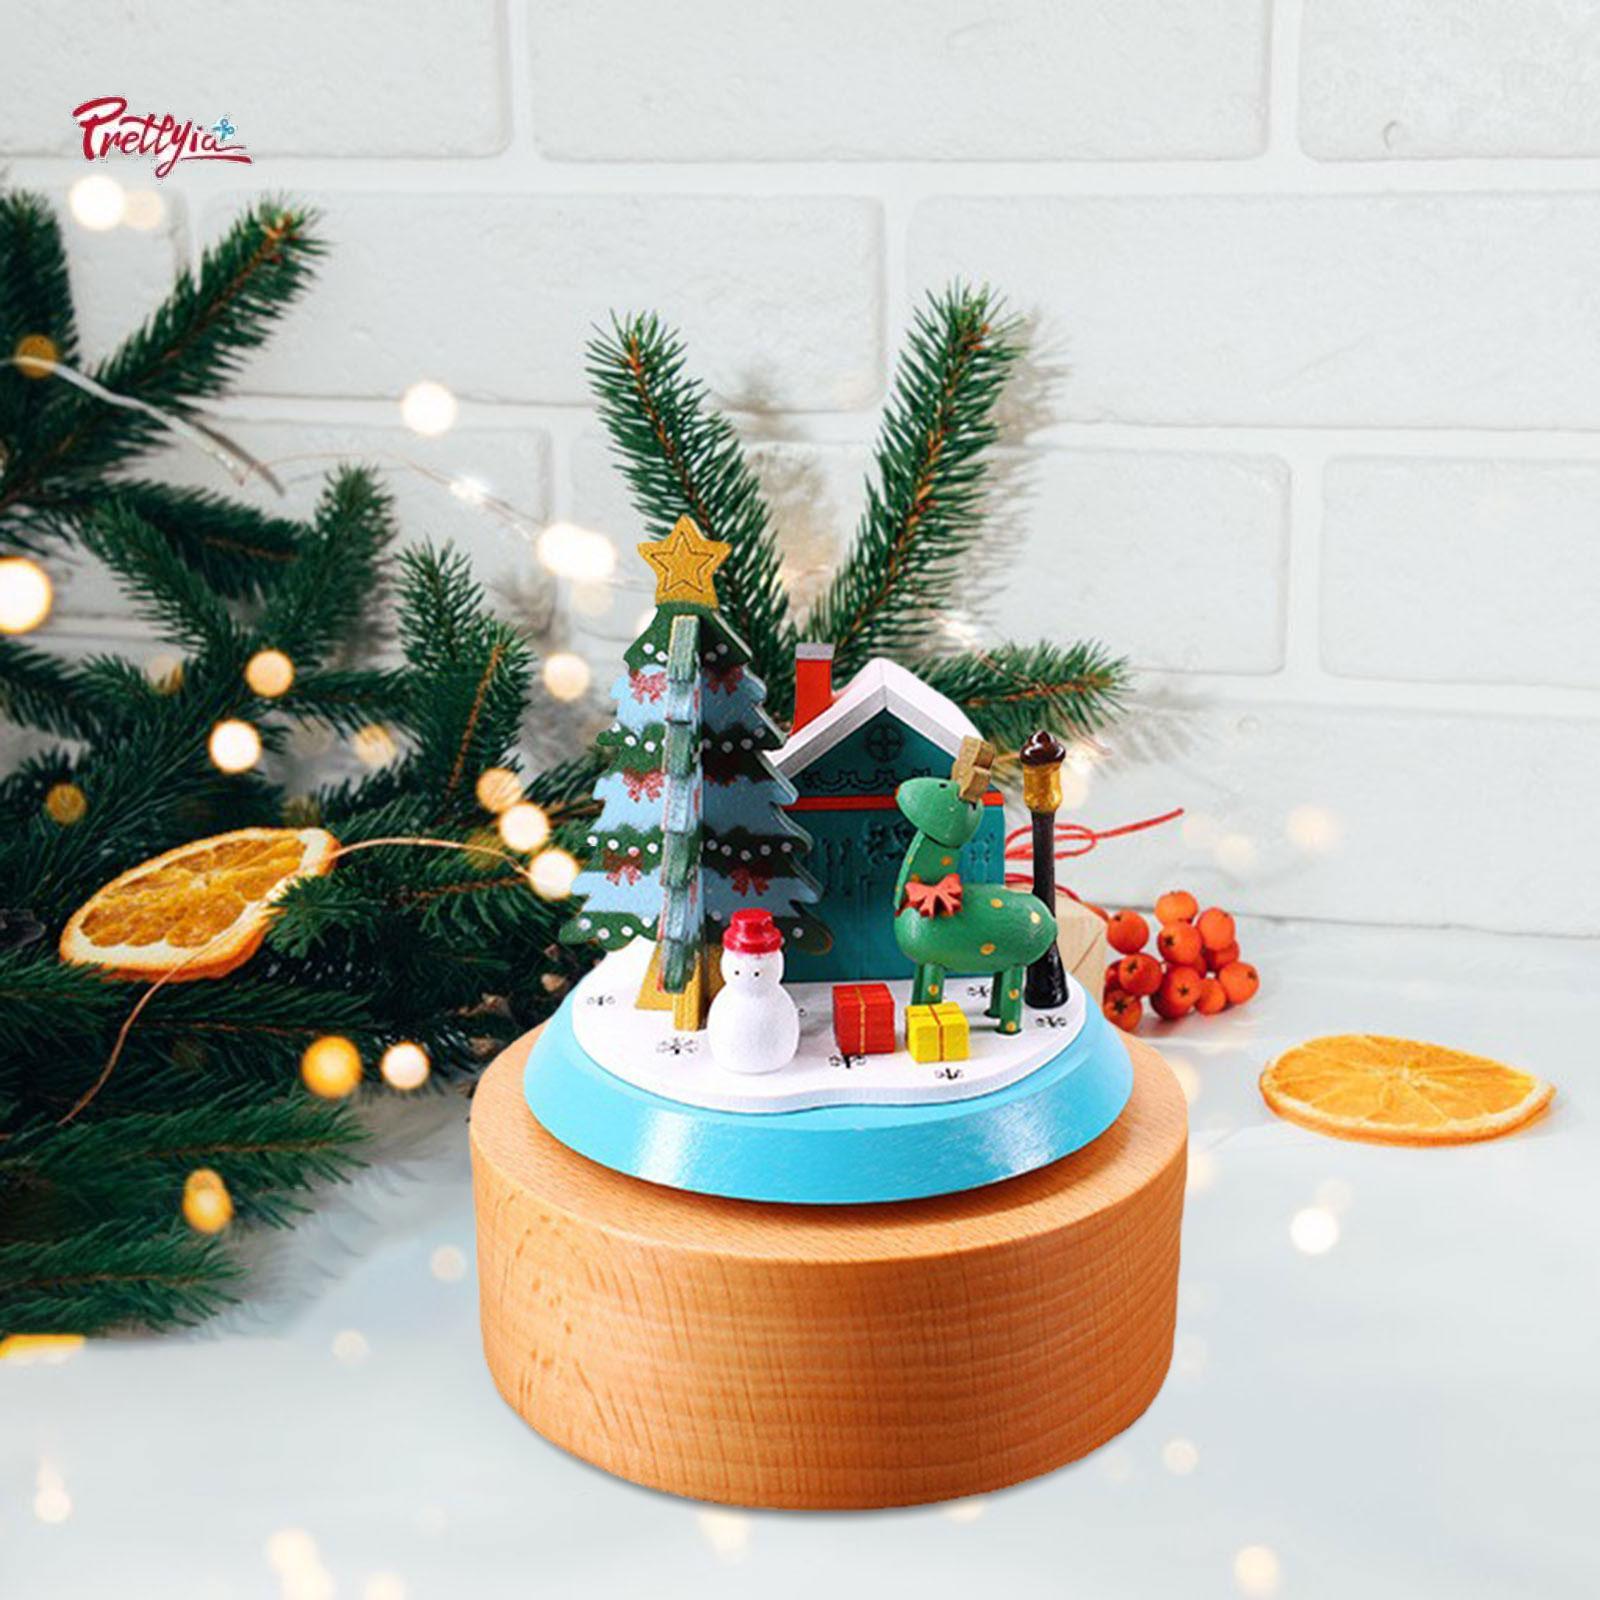 Prettyia Christmas Wooden Musical Boxes Play Melody merry Christmas for